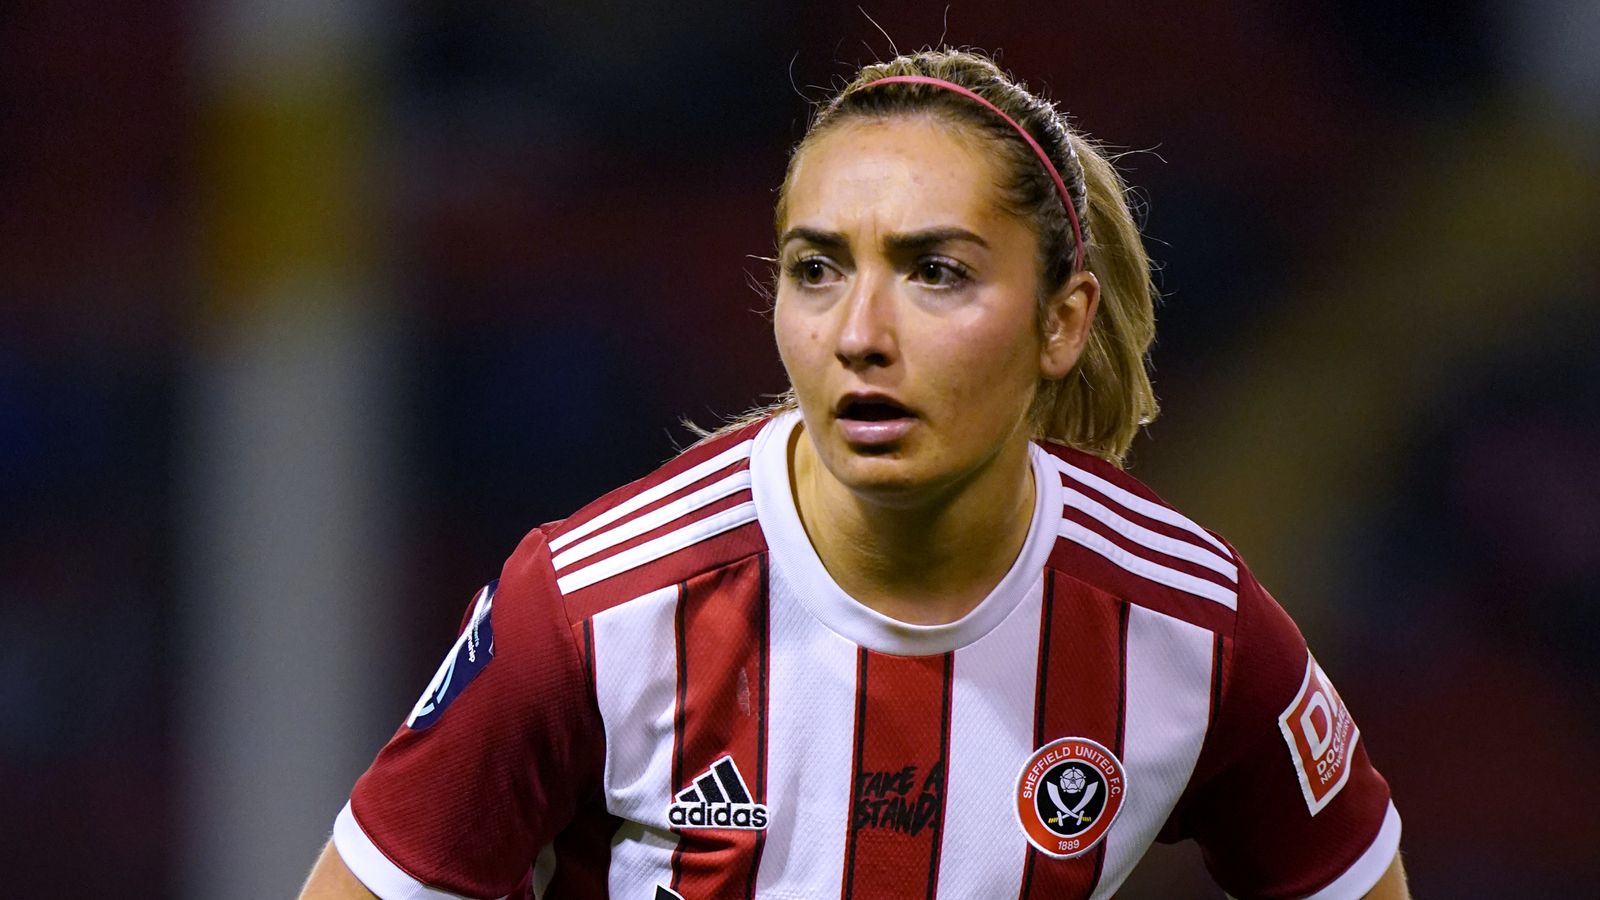 Jonathan Morgan: Football coach accused of bullying player who took own life sacked by Sheffield United Women